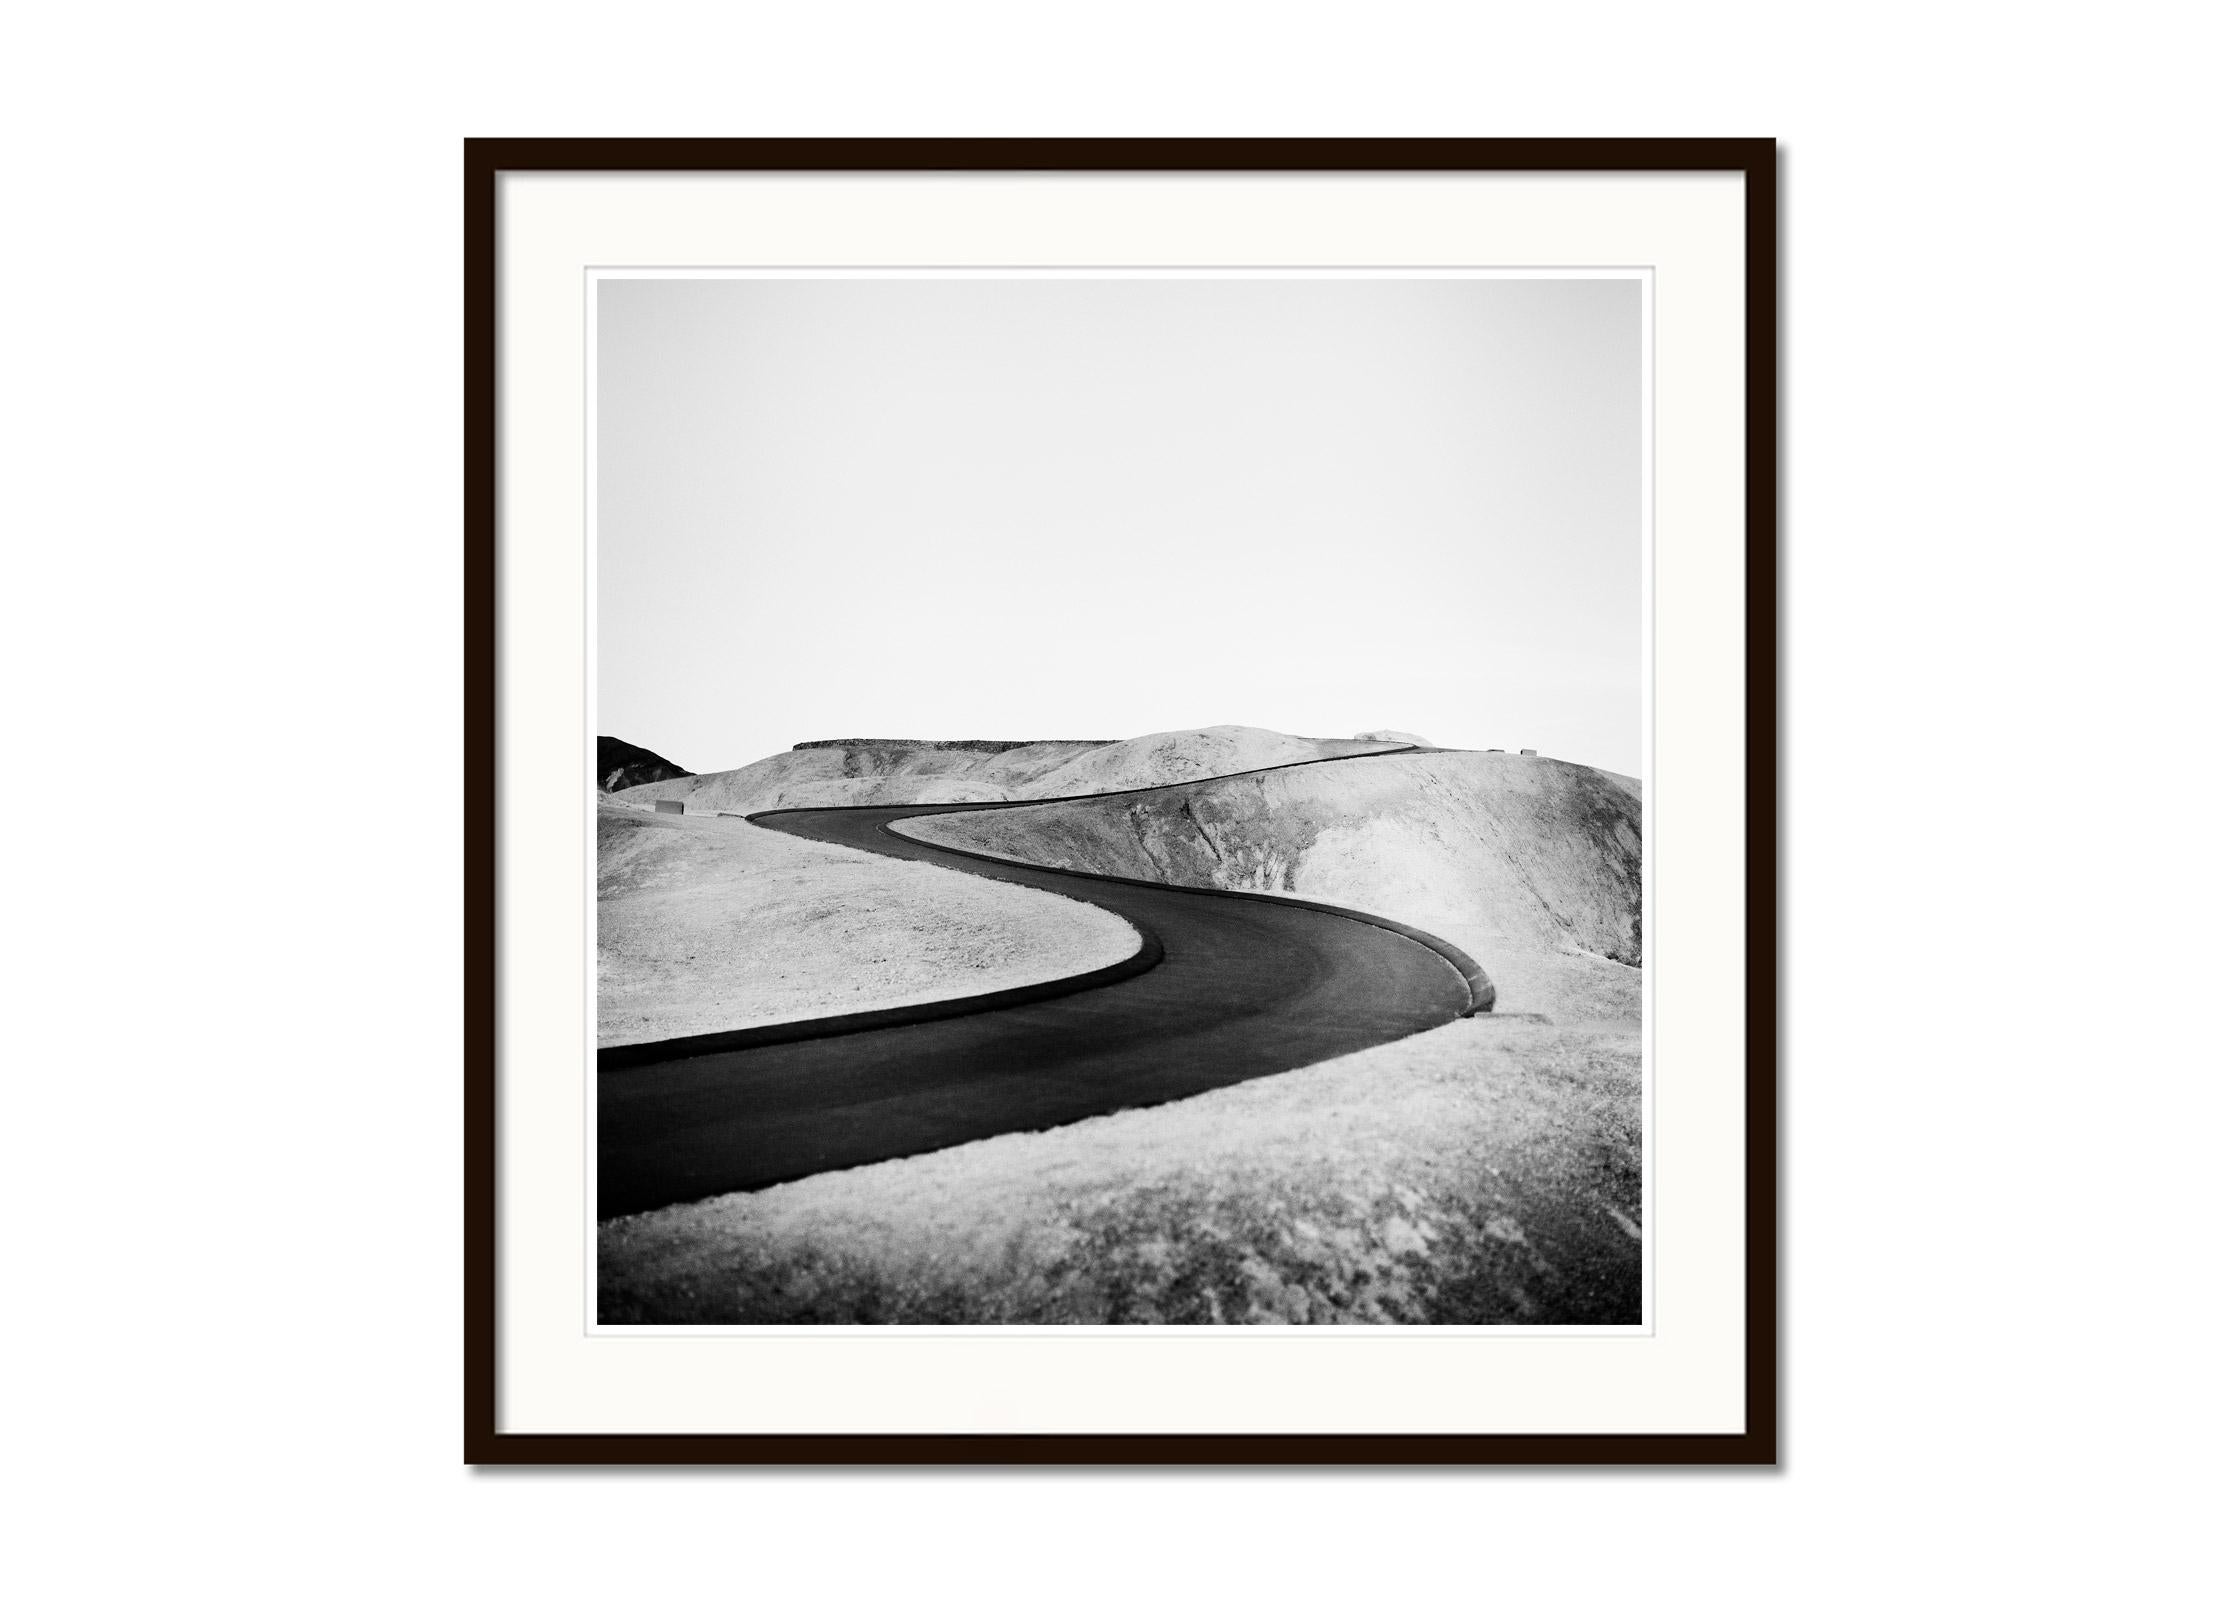 S Curve Shaped Road, Death Valley, California, USA, black and white landscape - Gray Black and White Photograph by Gerald Berghammer